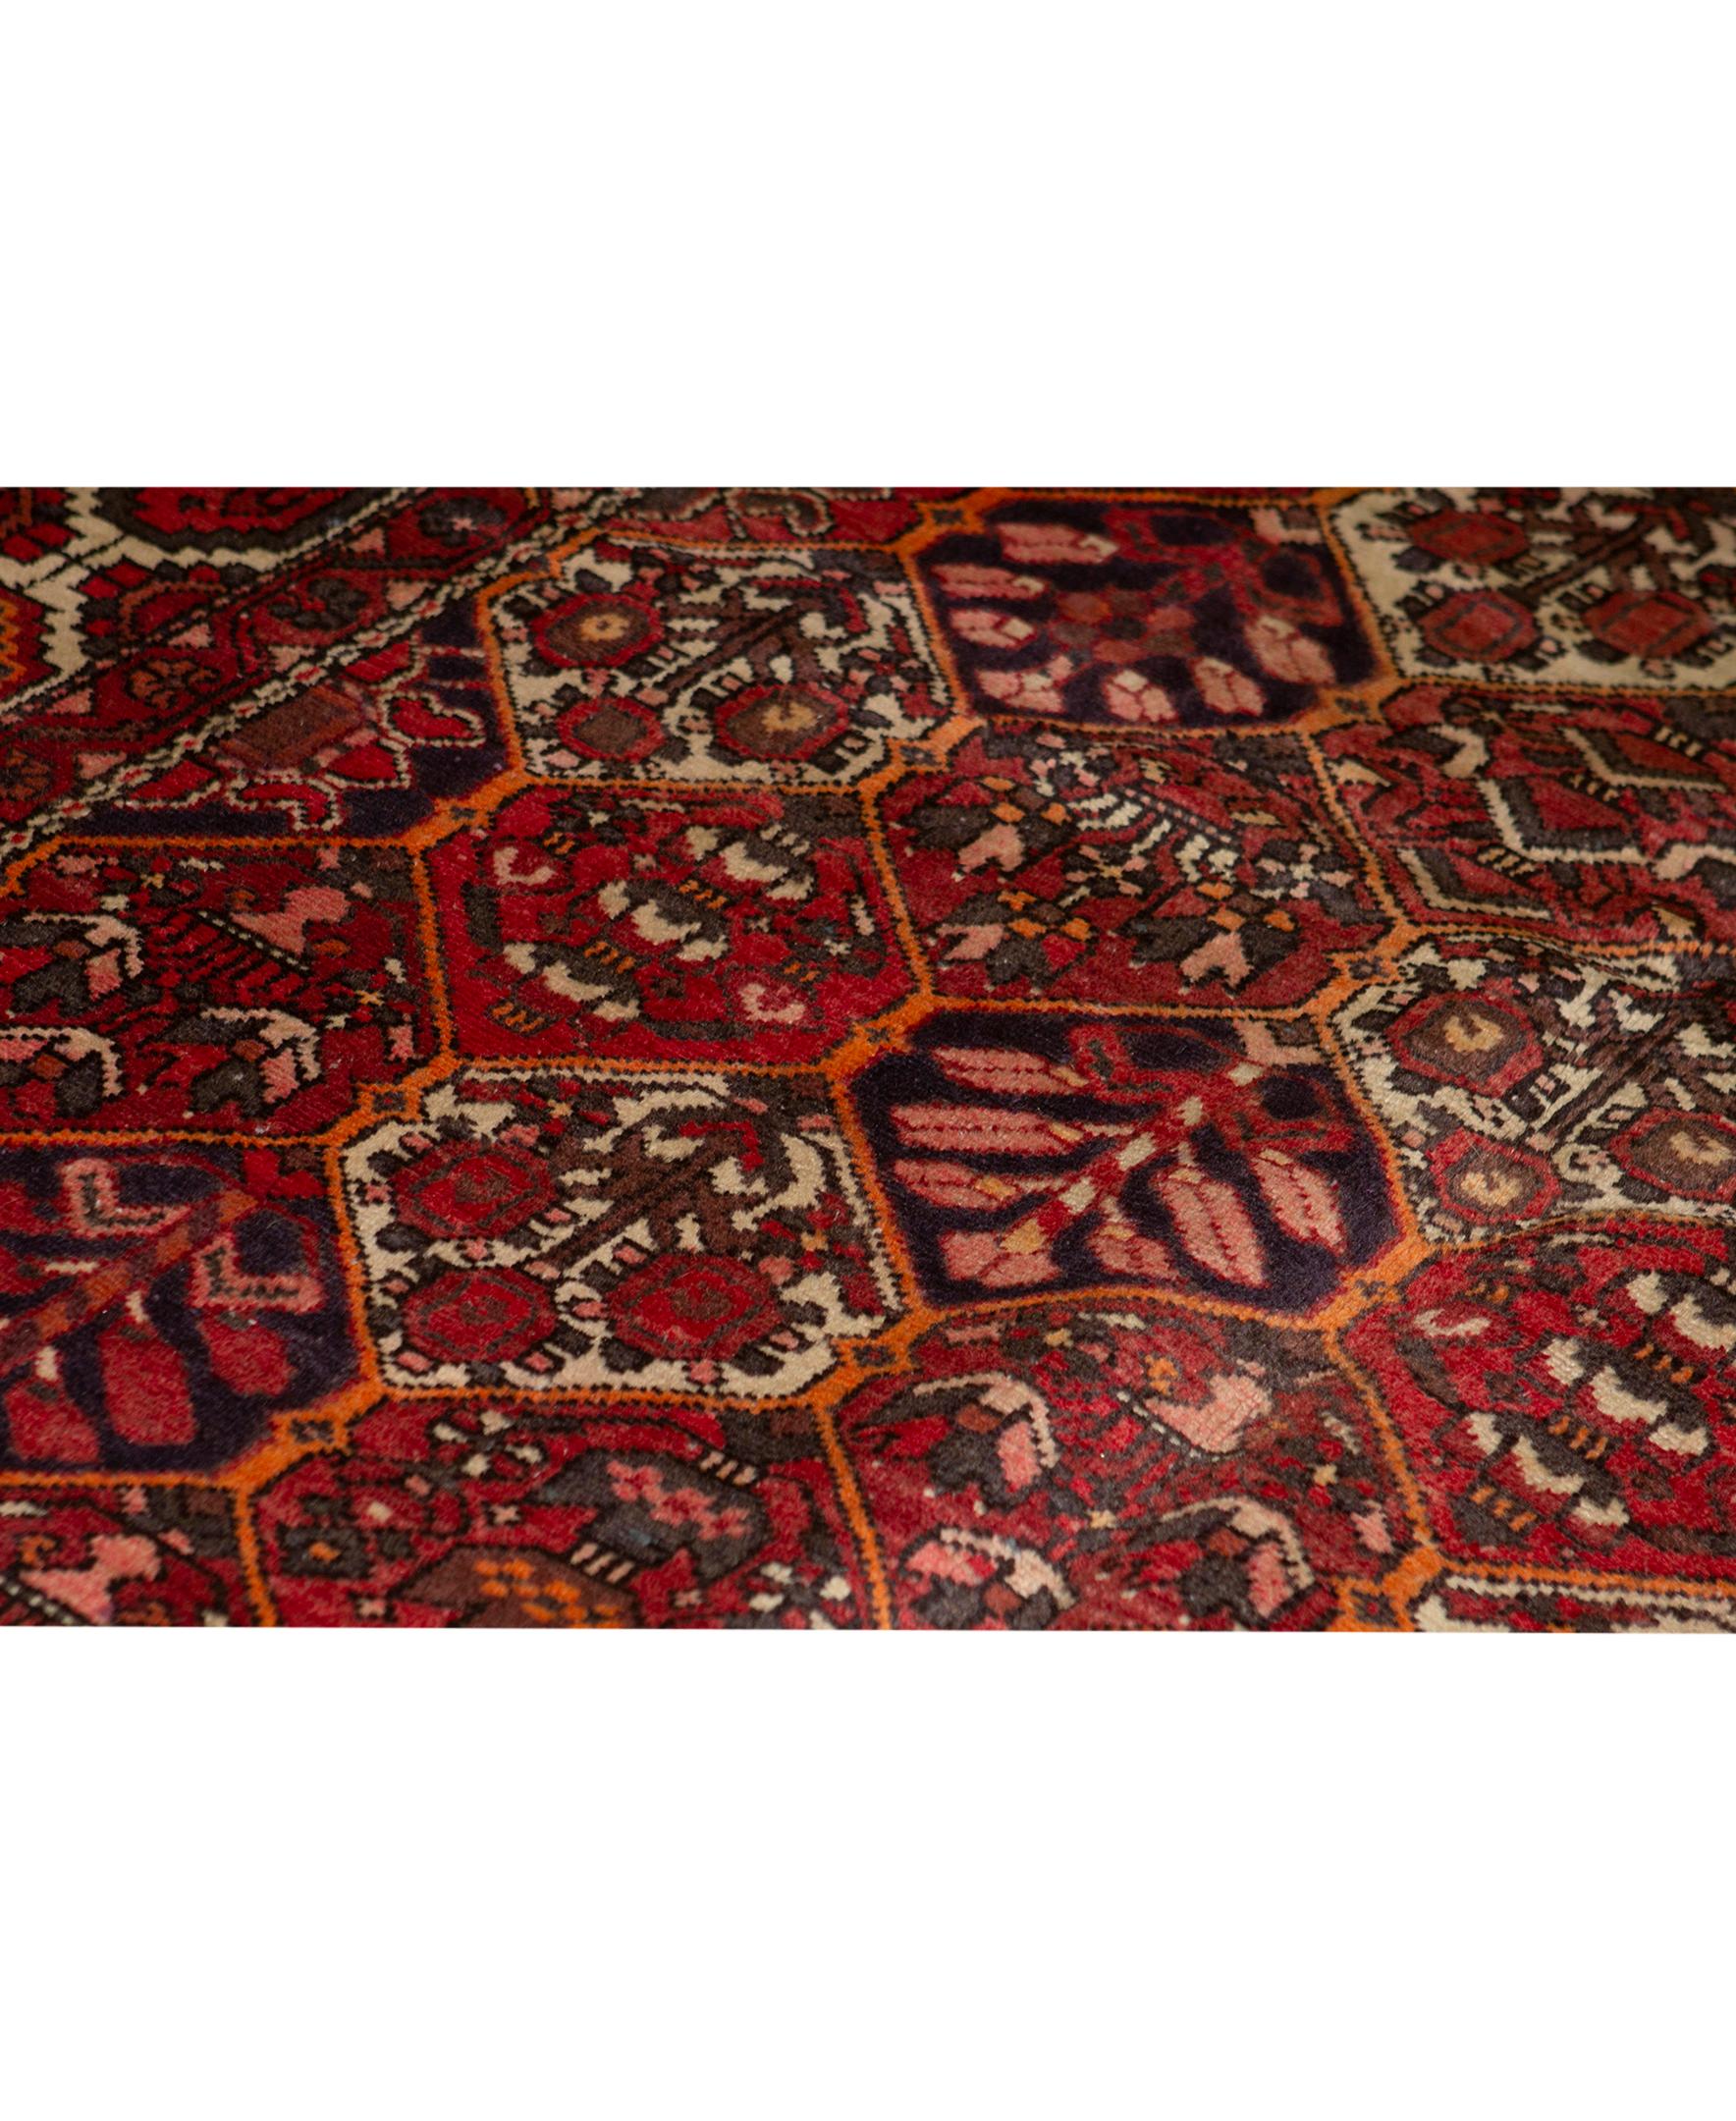   Antique Persian Fine Traditional Handwoven Luxury Wool Ivory / Red Rug. Size: 6'-9